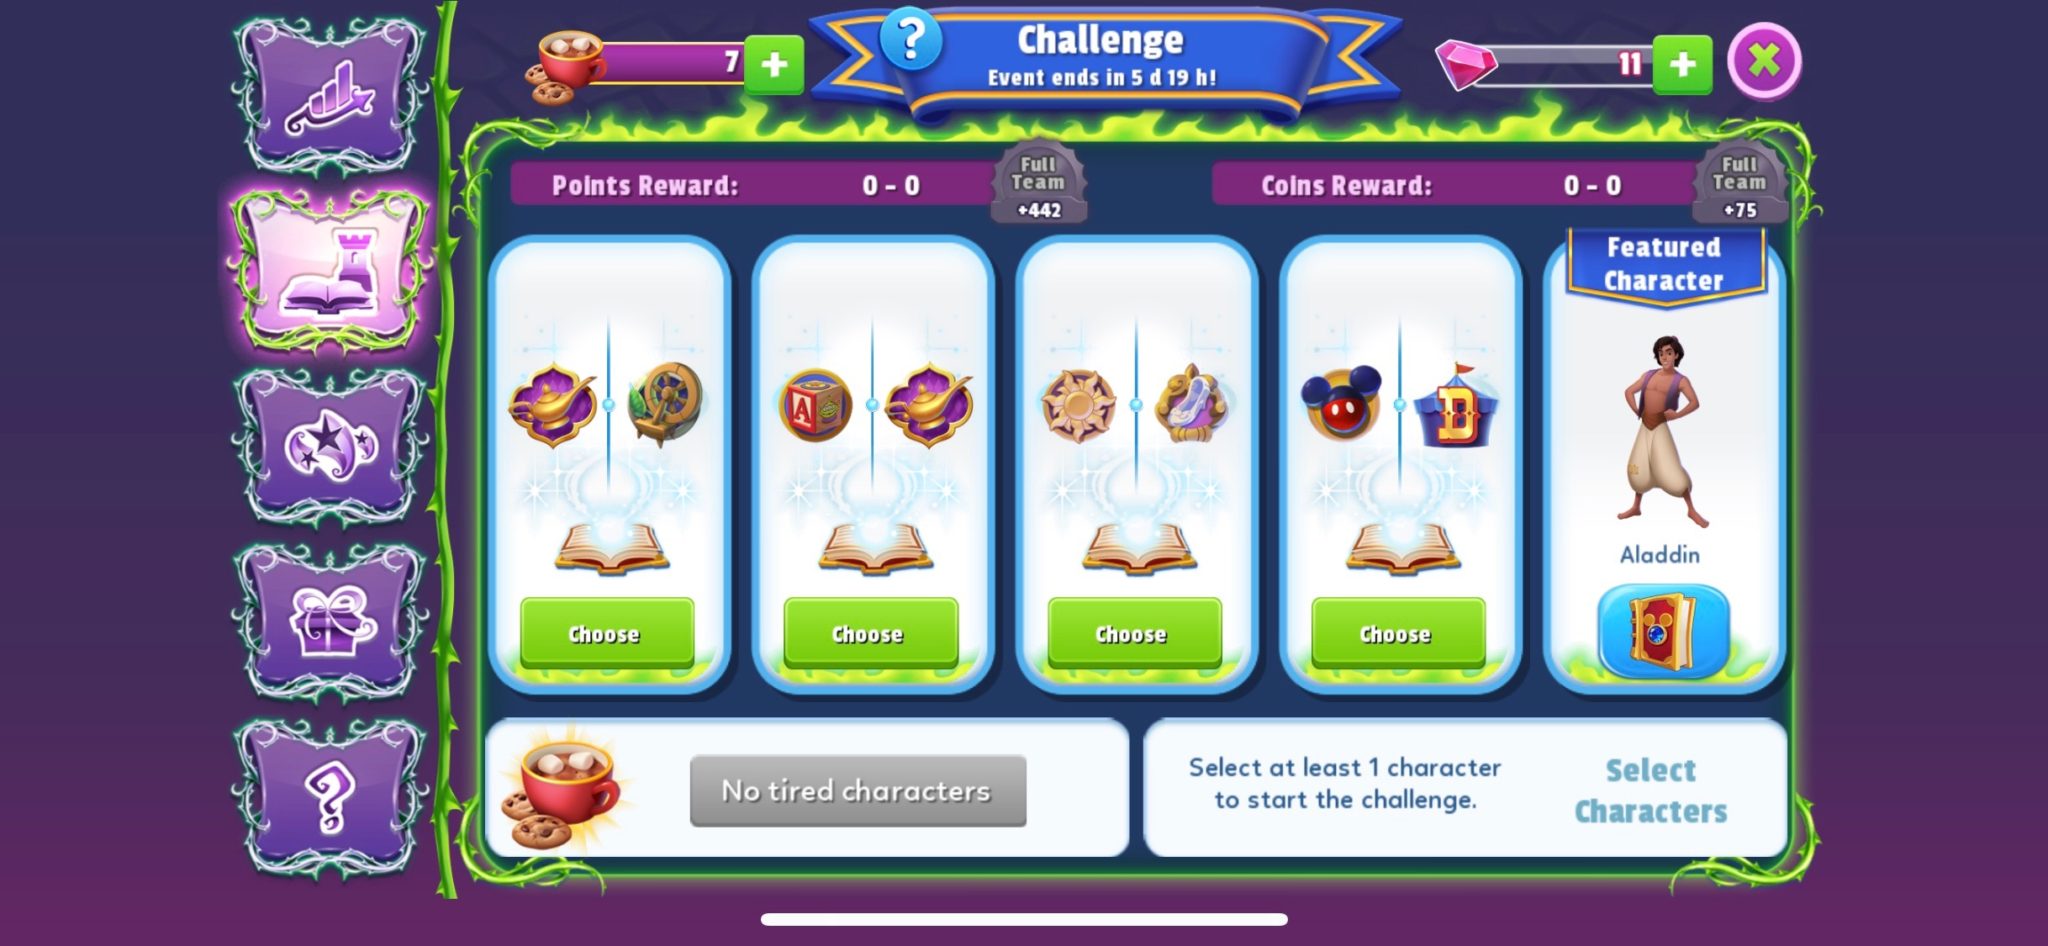 how much do the character cost on disney magic kingdoms tower challenge